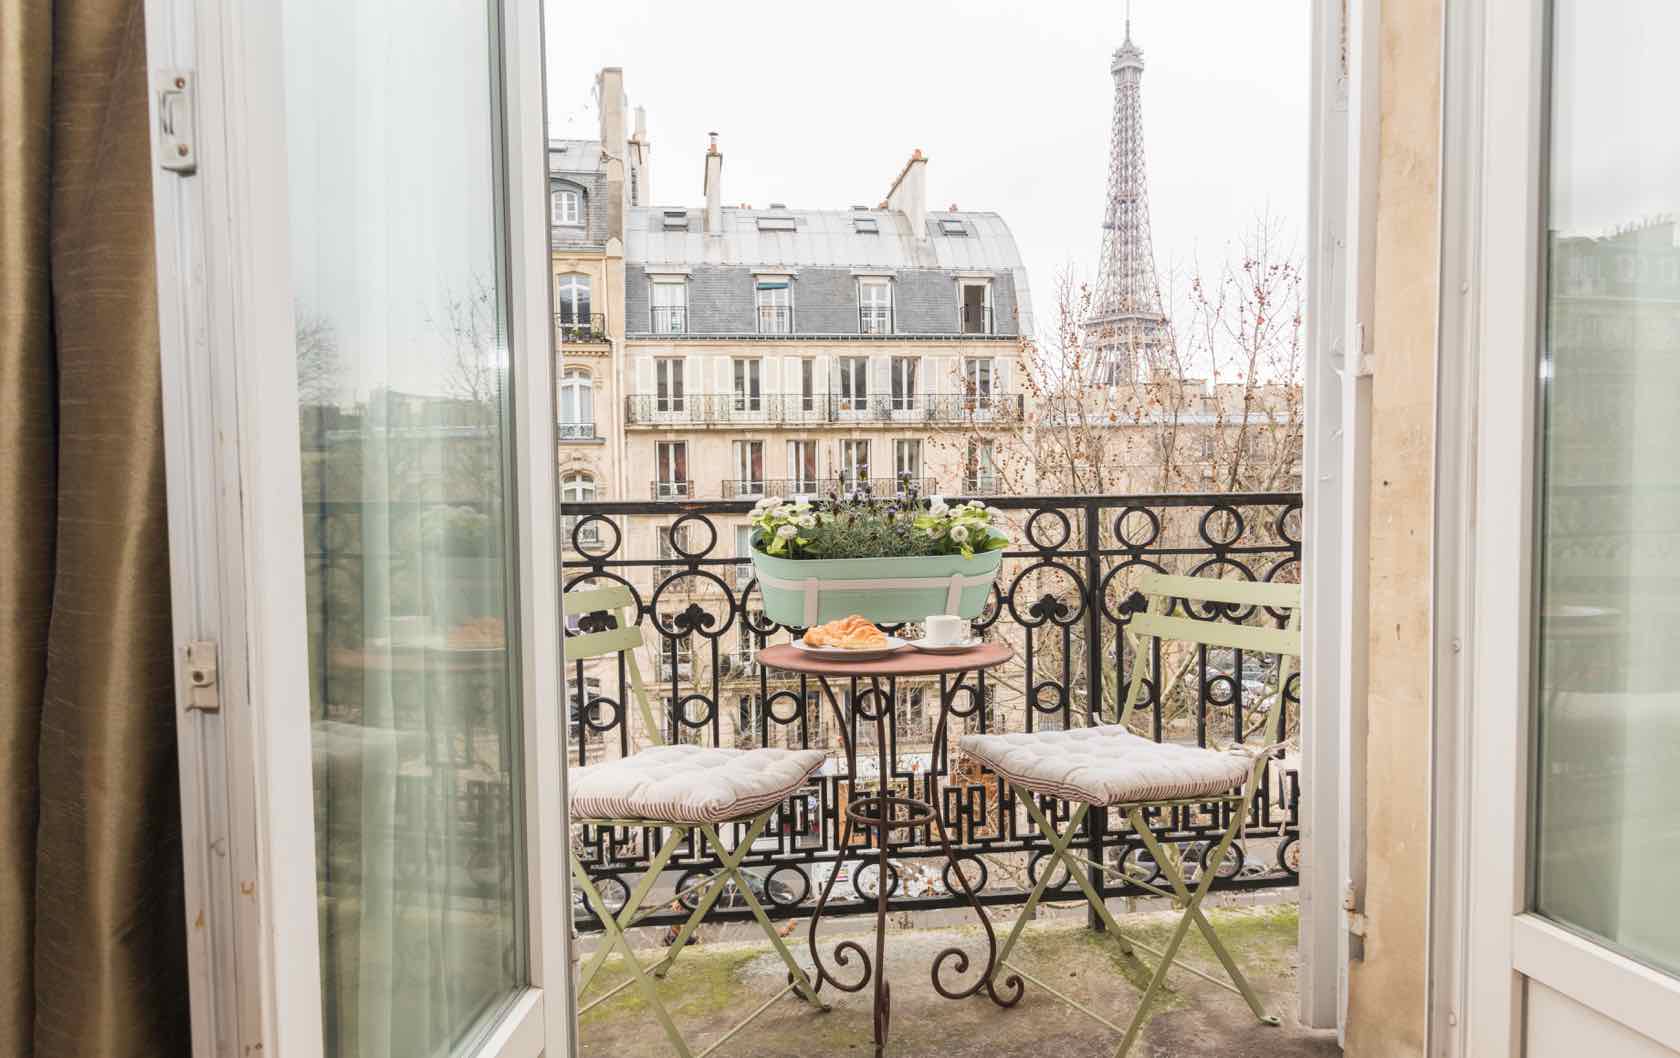 A Fractional Owner Interview Eiffel Tower view